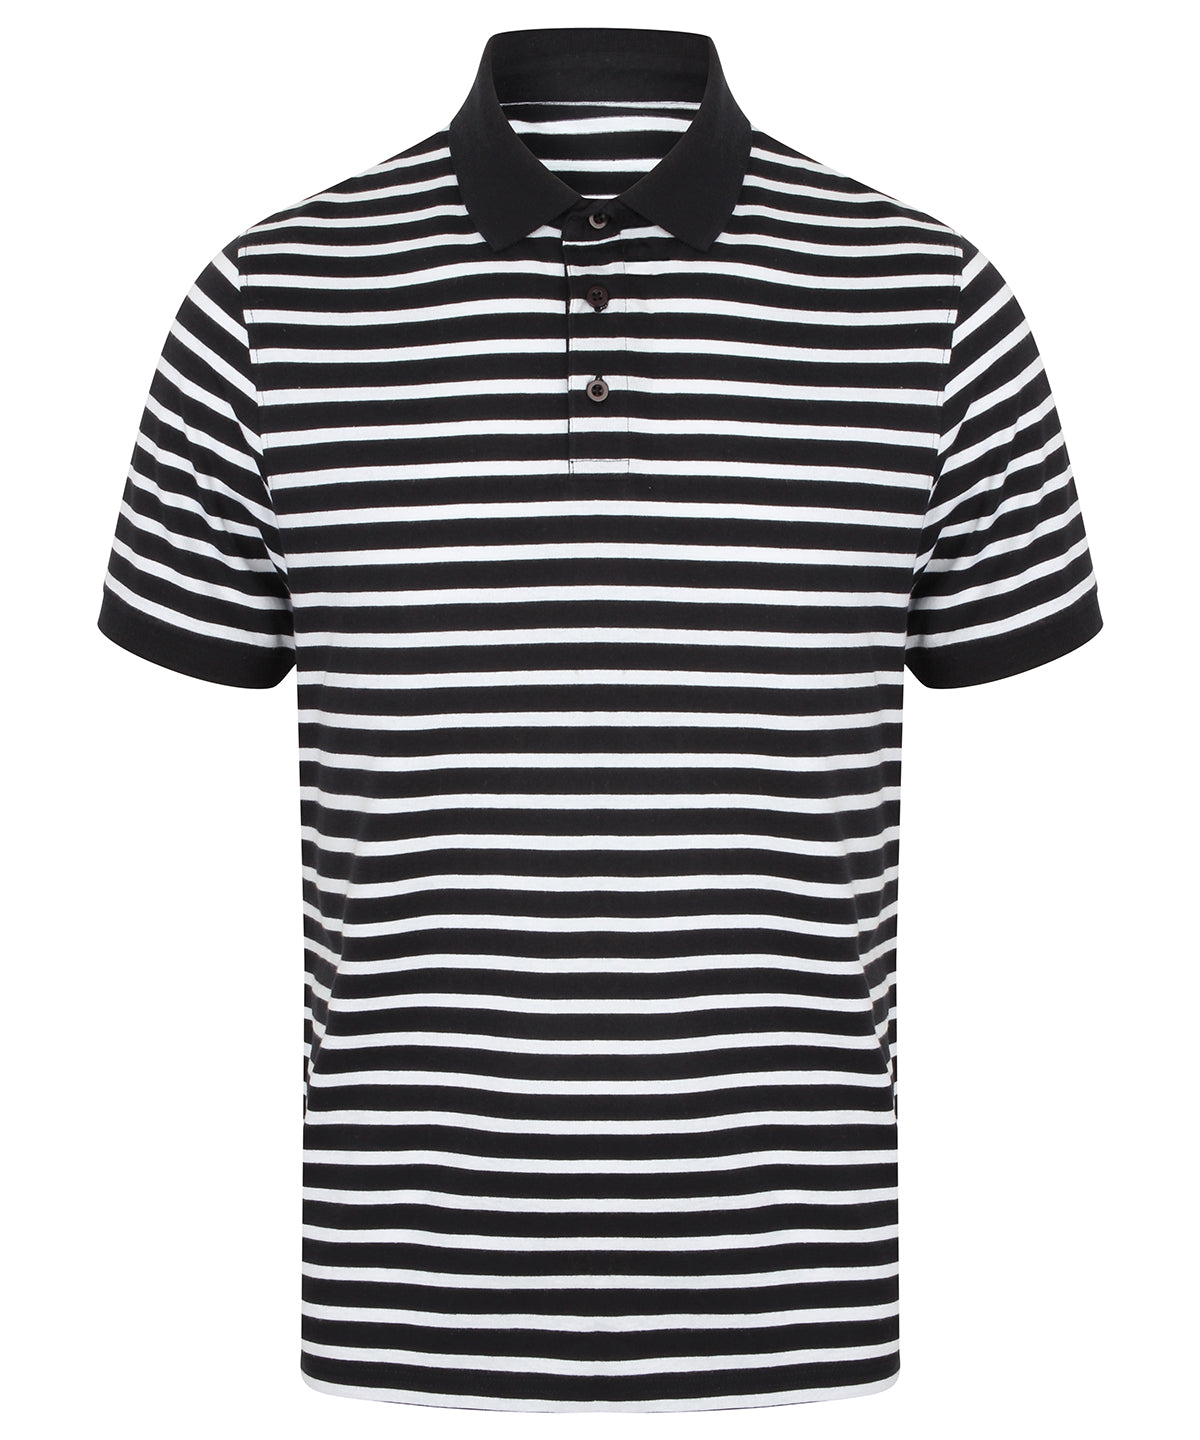 Personalised Polo Shirts - Stripes Front Row Striped Jersey polo shirt